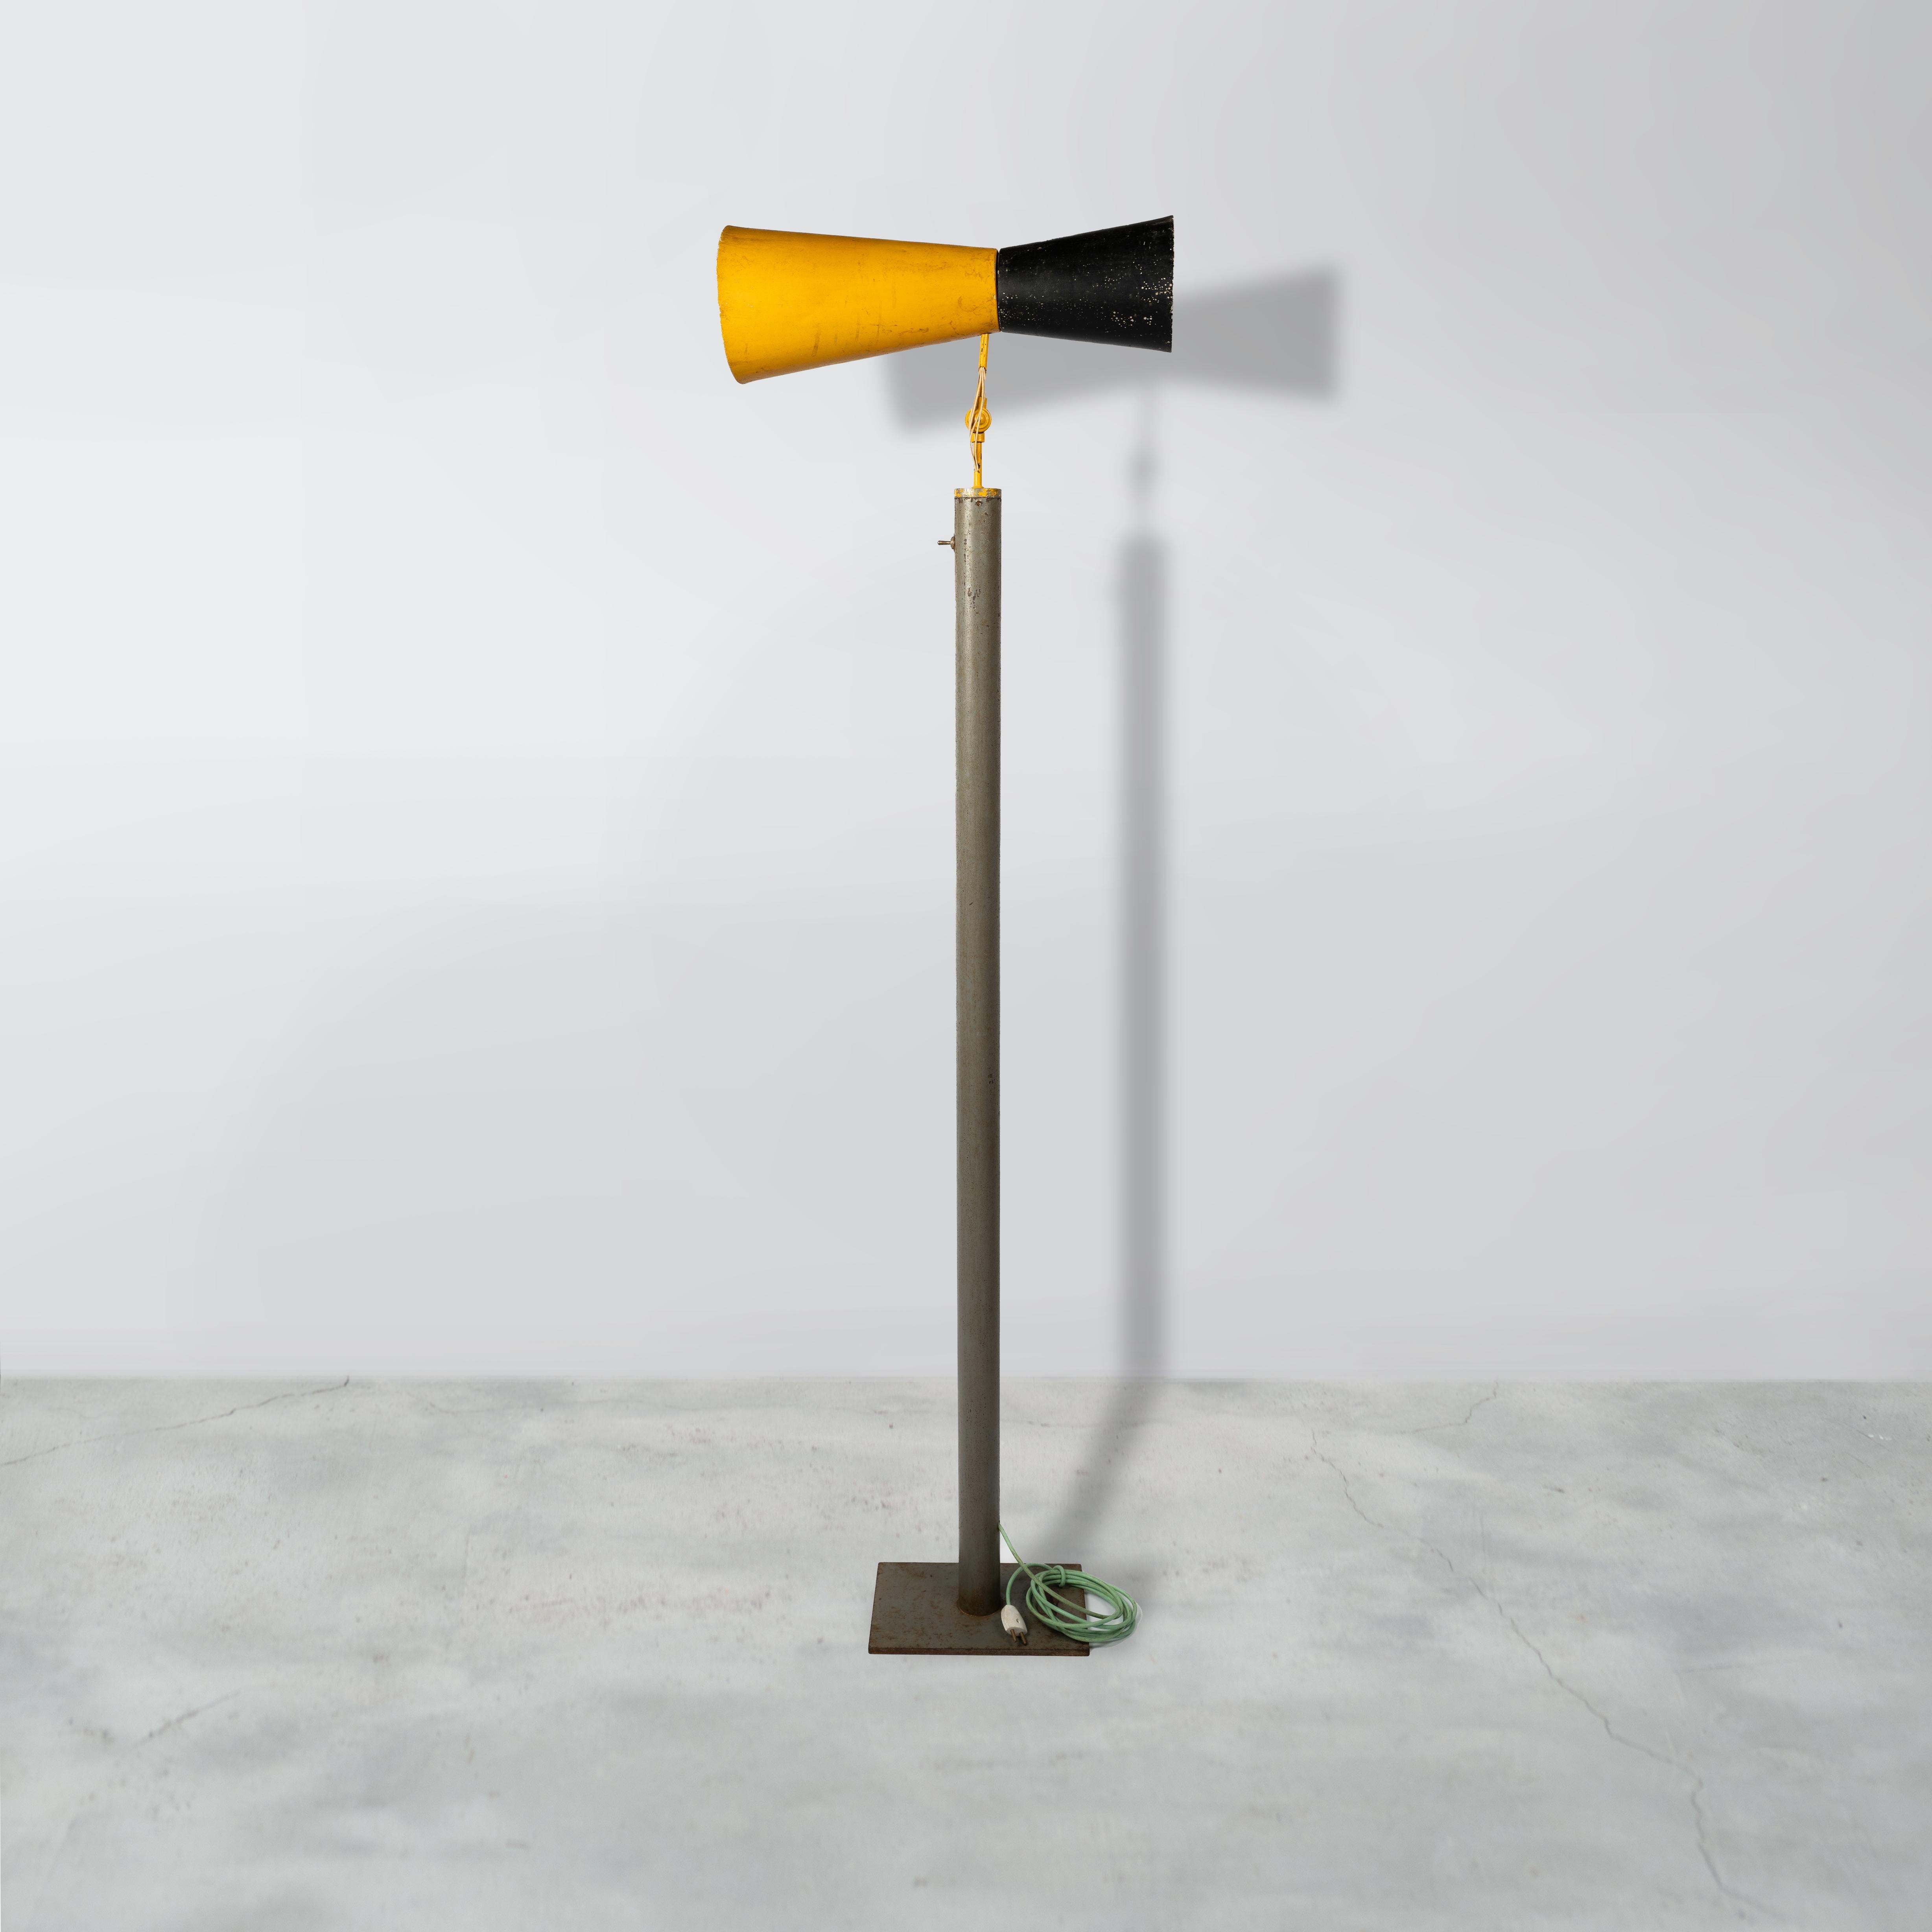 This lamp is not only a fantastic piece, it’s a rare collectors item. It is raw in its simplicity, embodying an expressing a nonchalance. It is a beautiful piece that could be put in a bedroom, in a walk way or as additional object in a living room.